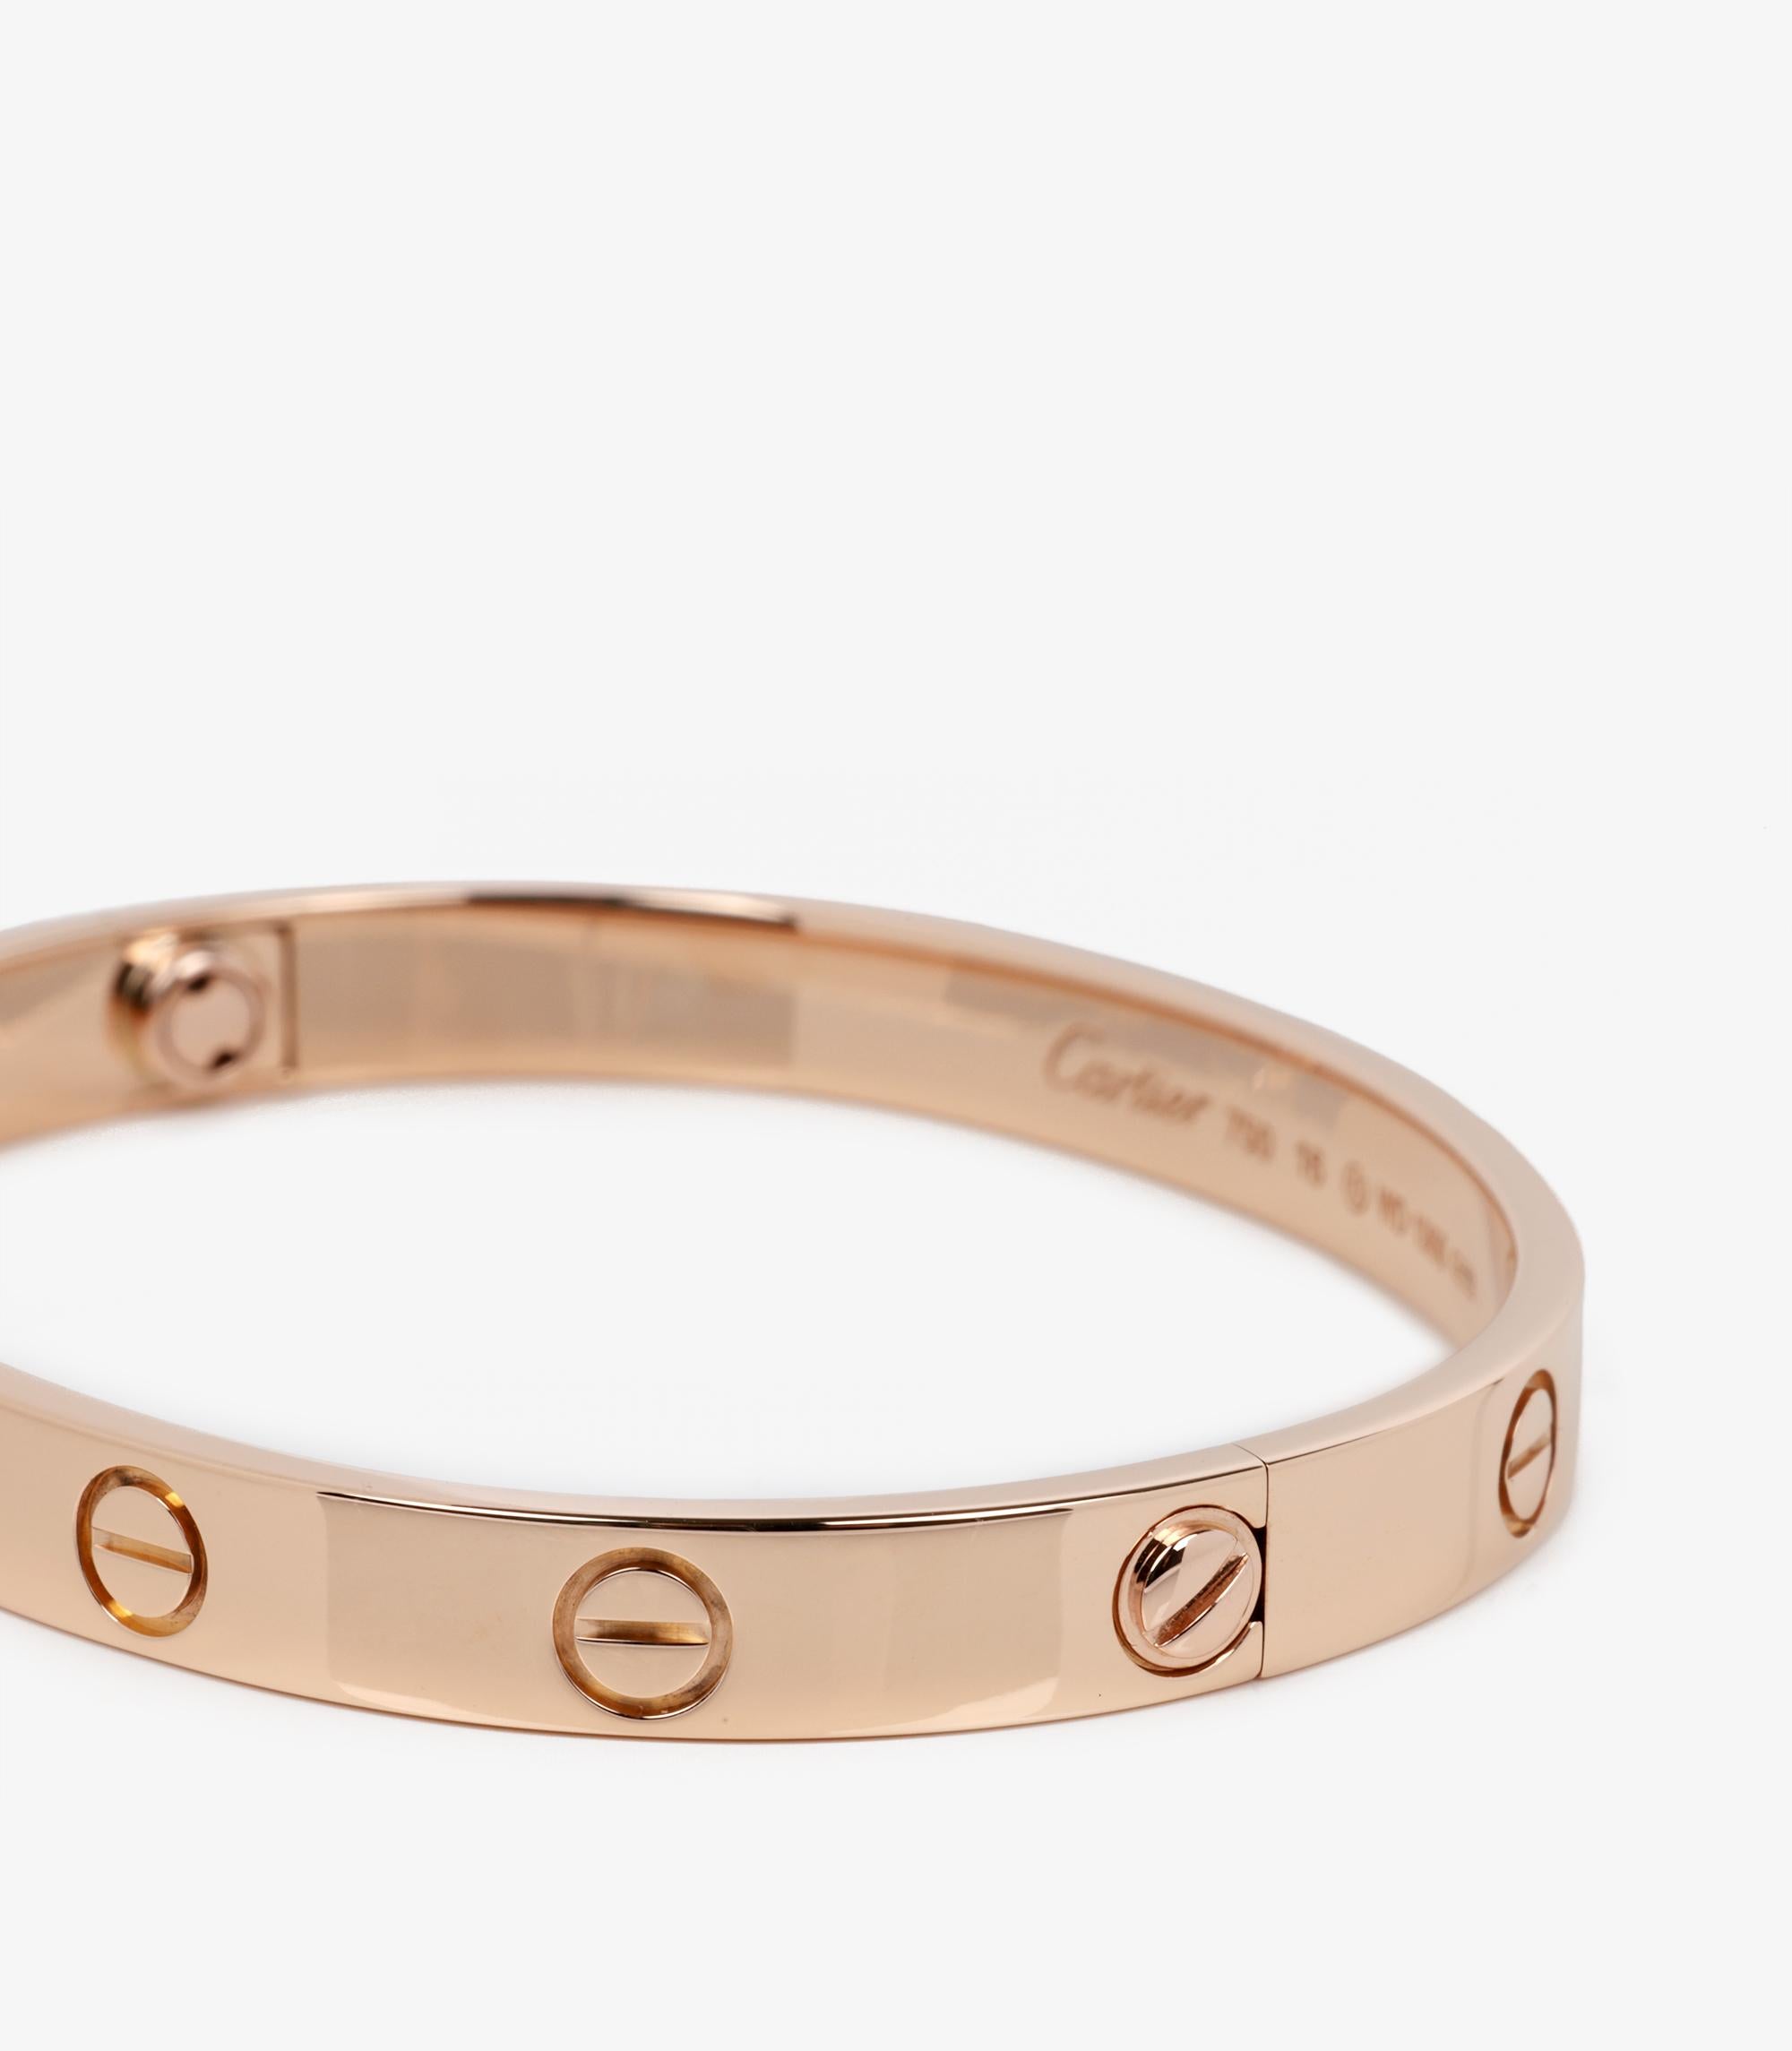 Cartier 18ct Rose Gold Love Bangle For Sale 1